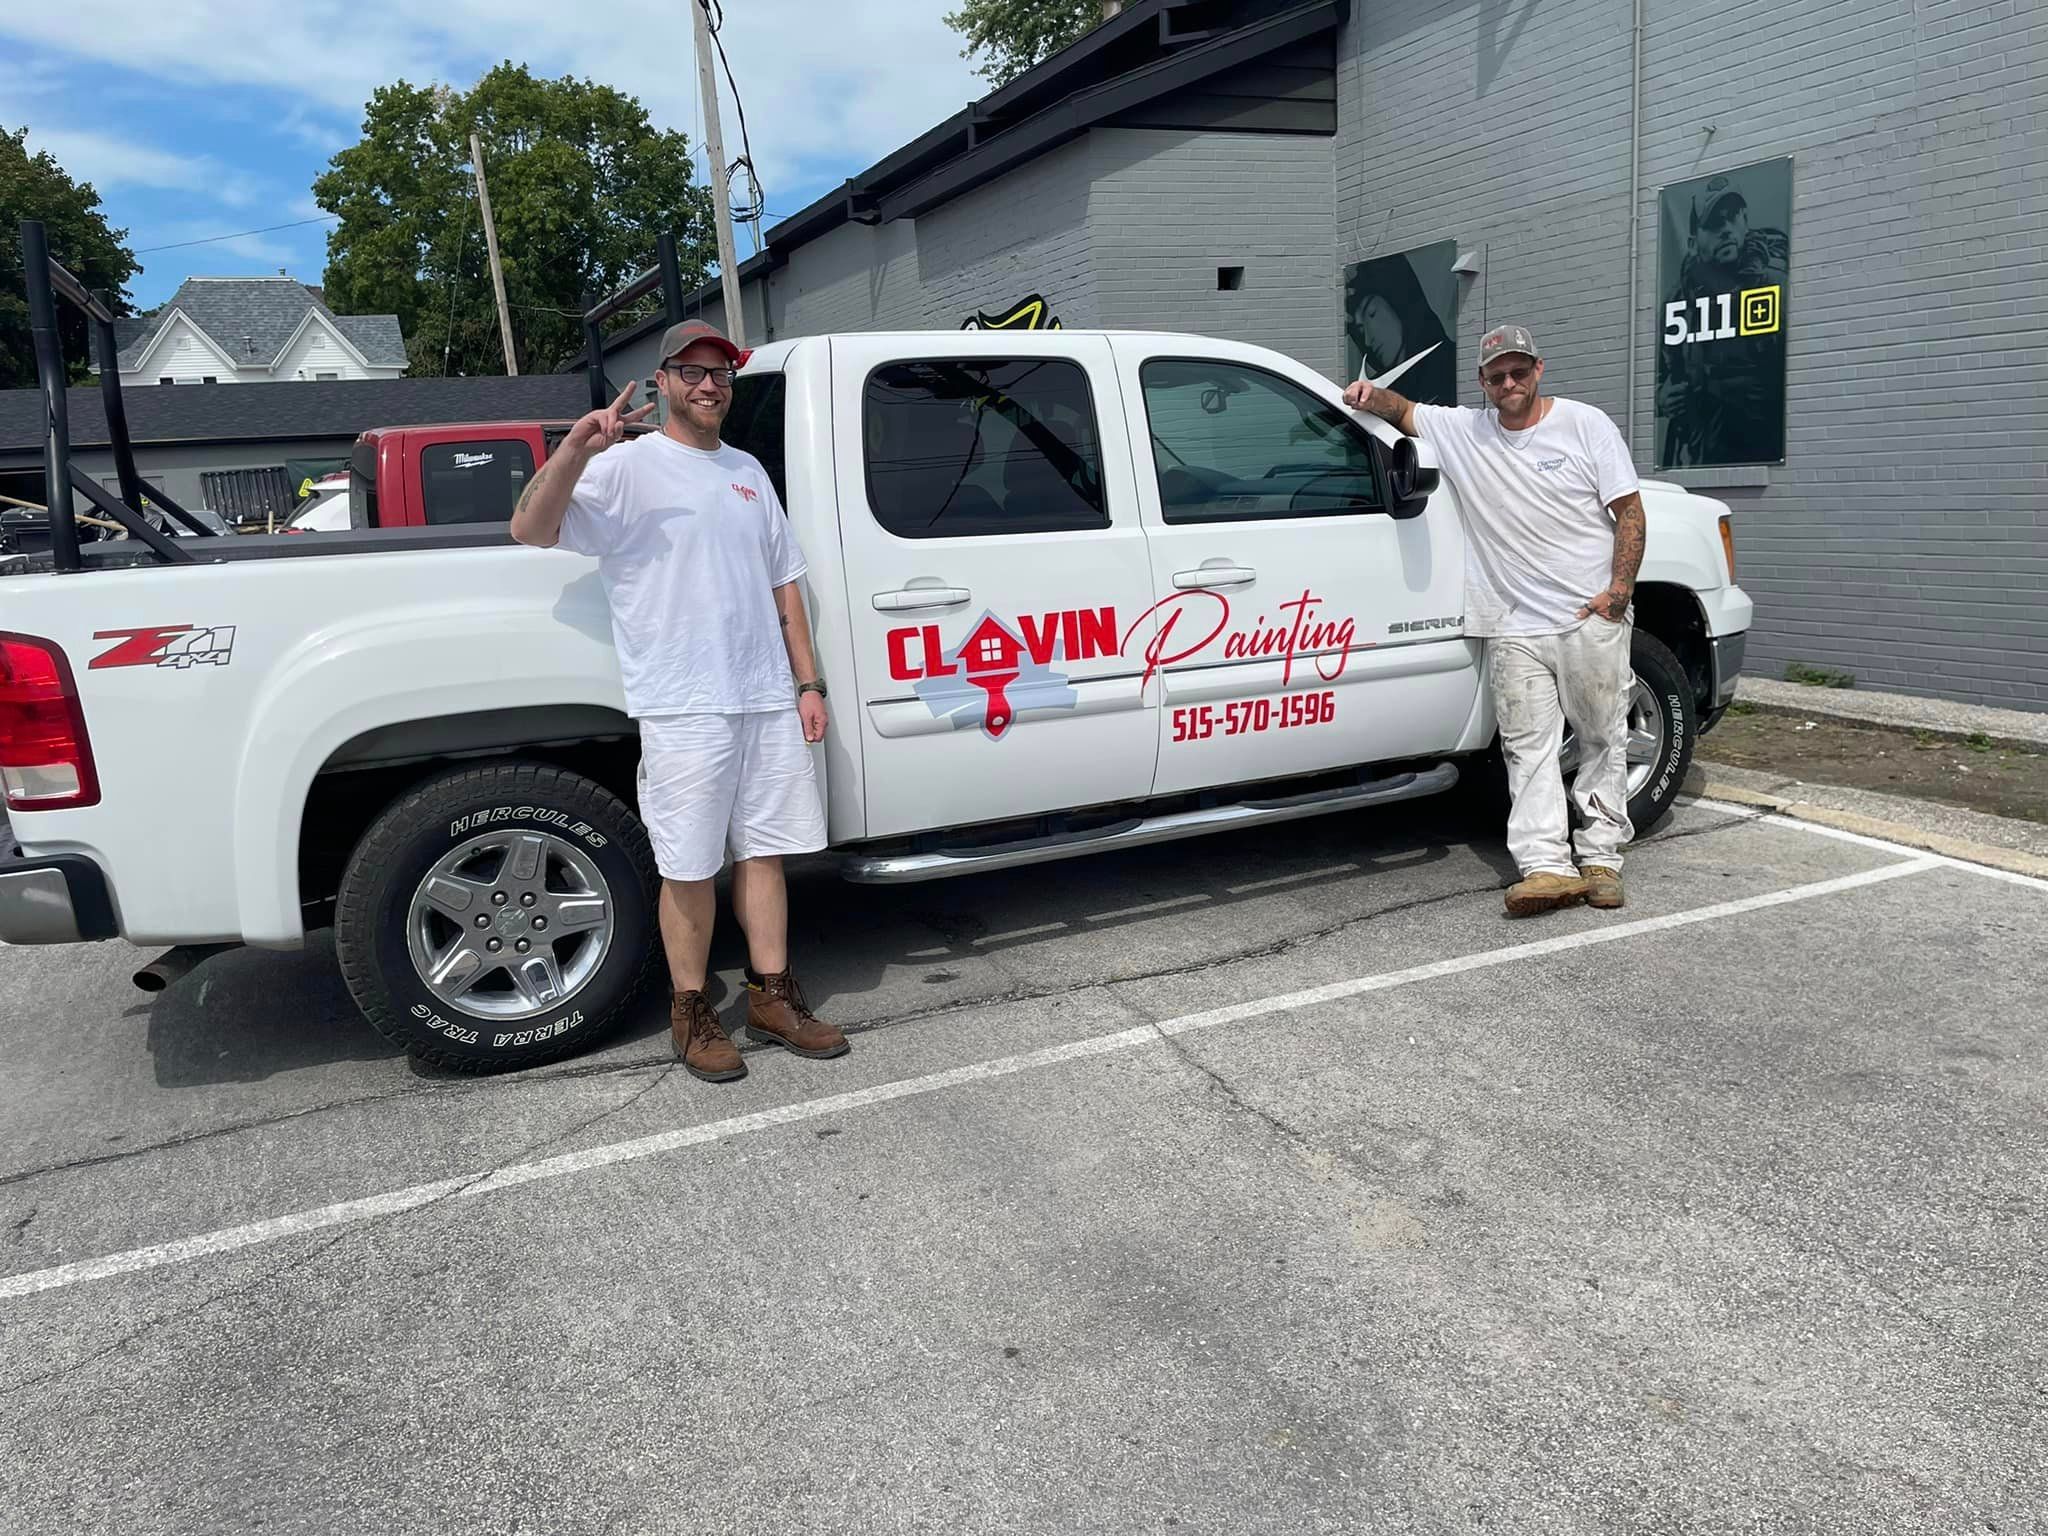 Our Equipment and Team for Clavin Painting in Fort Dodge, Iowa